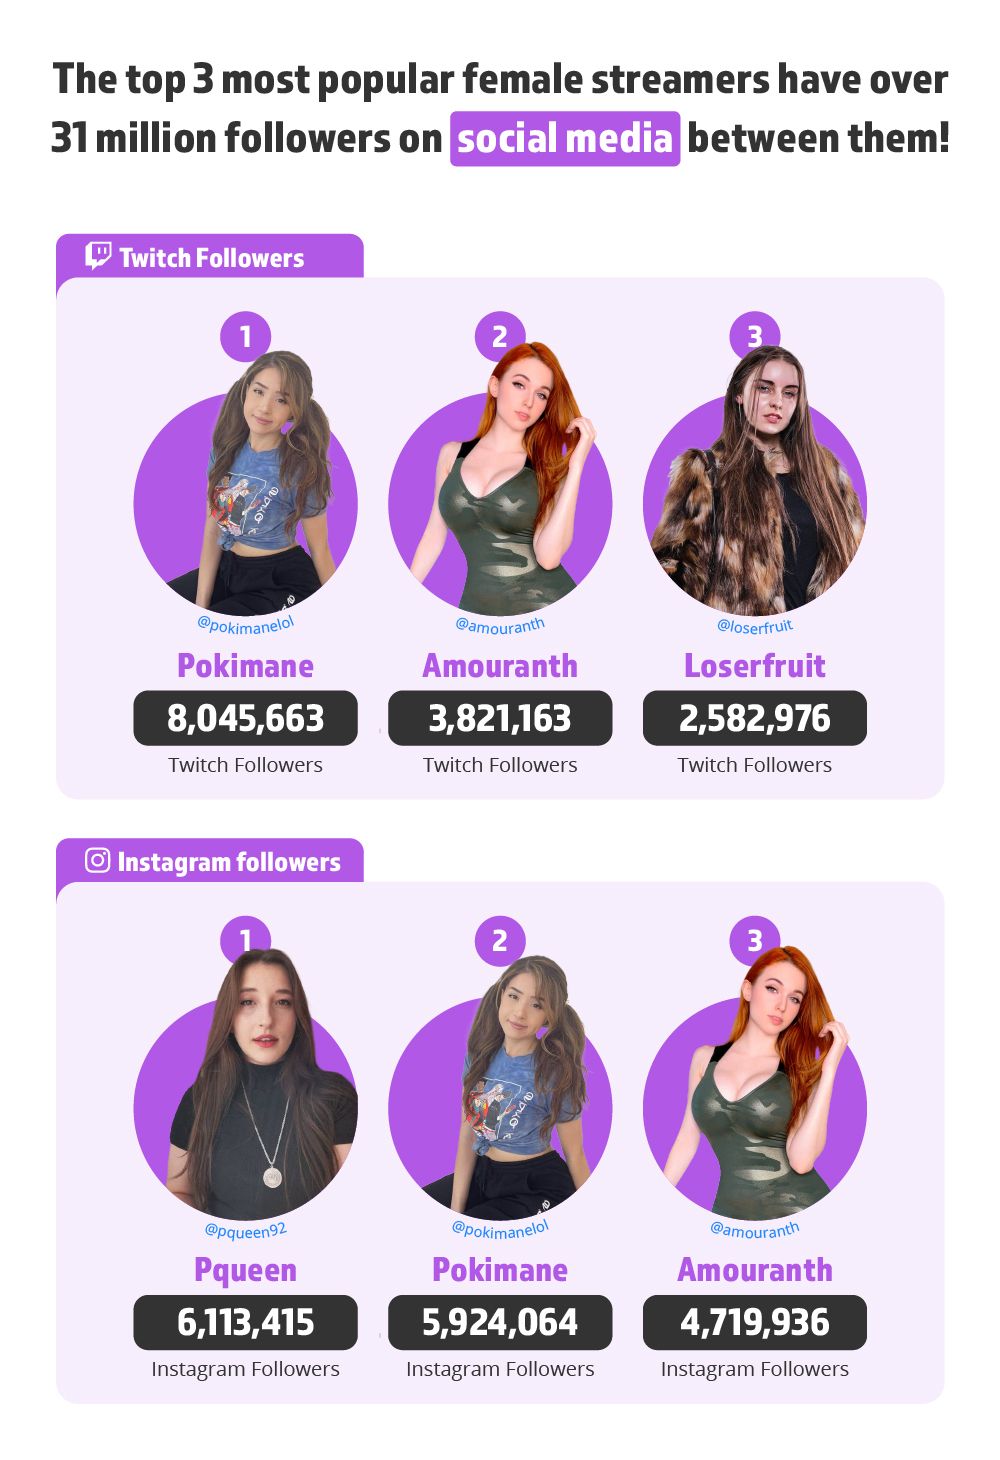 Top earning Twitch streamers 2020